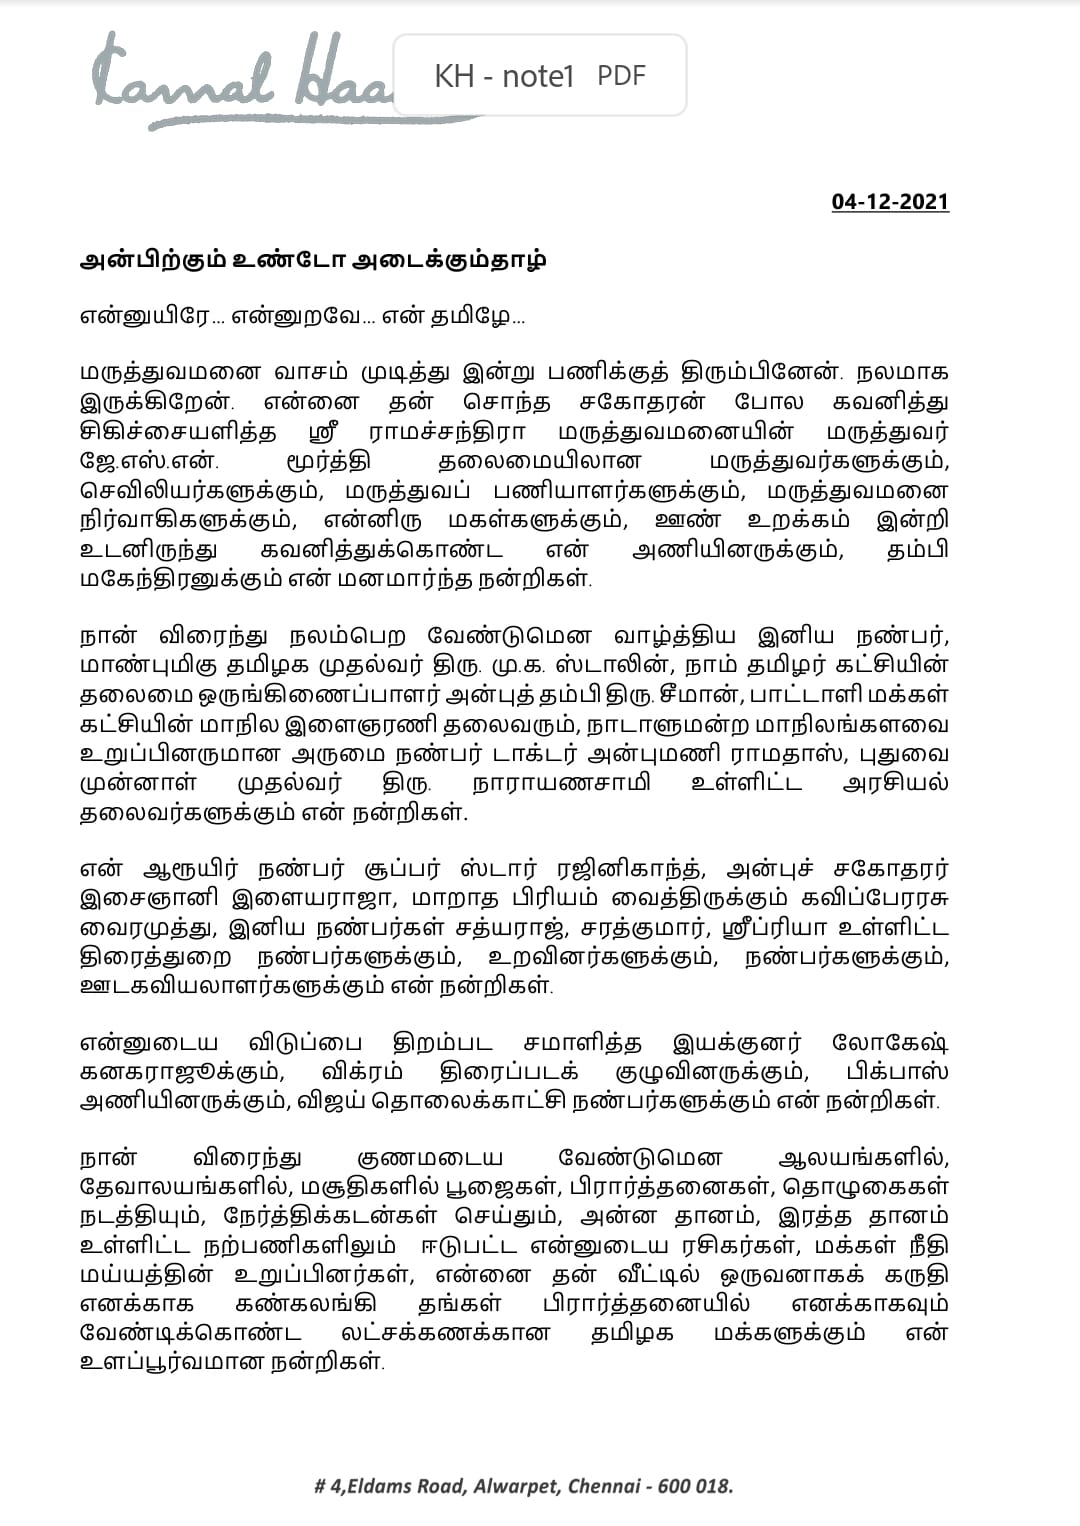 Kamal Haasan Statement about his Health Condition